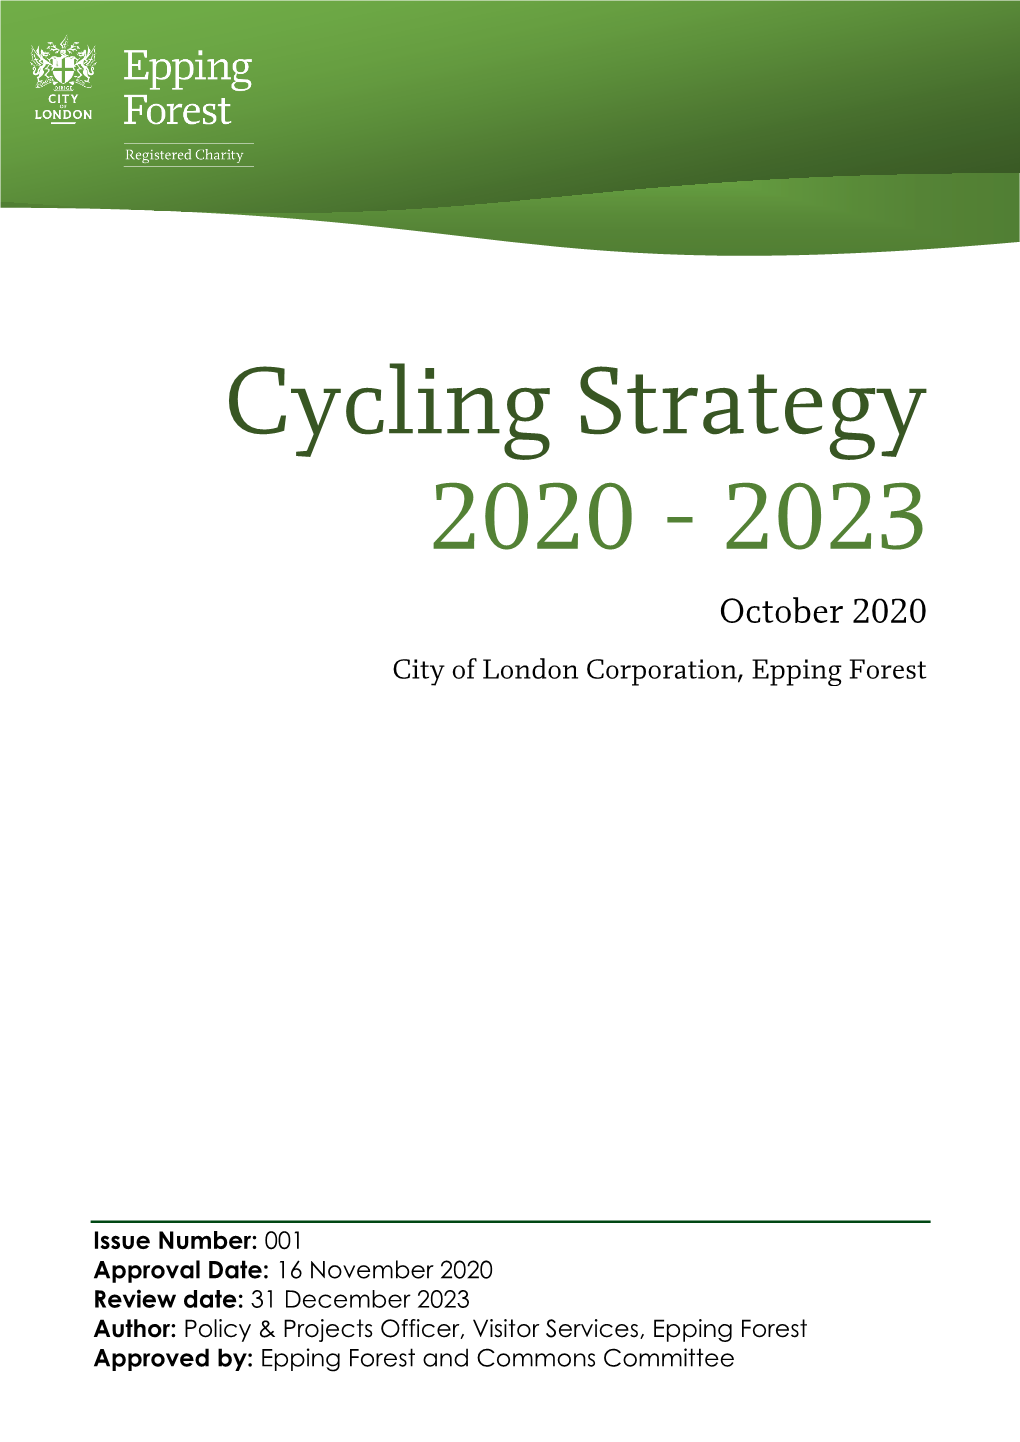 Cycling Strategy 2020 - 2023 October 2020 City of London Corporation, Epping Forest